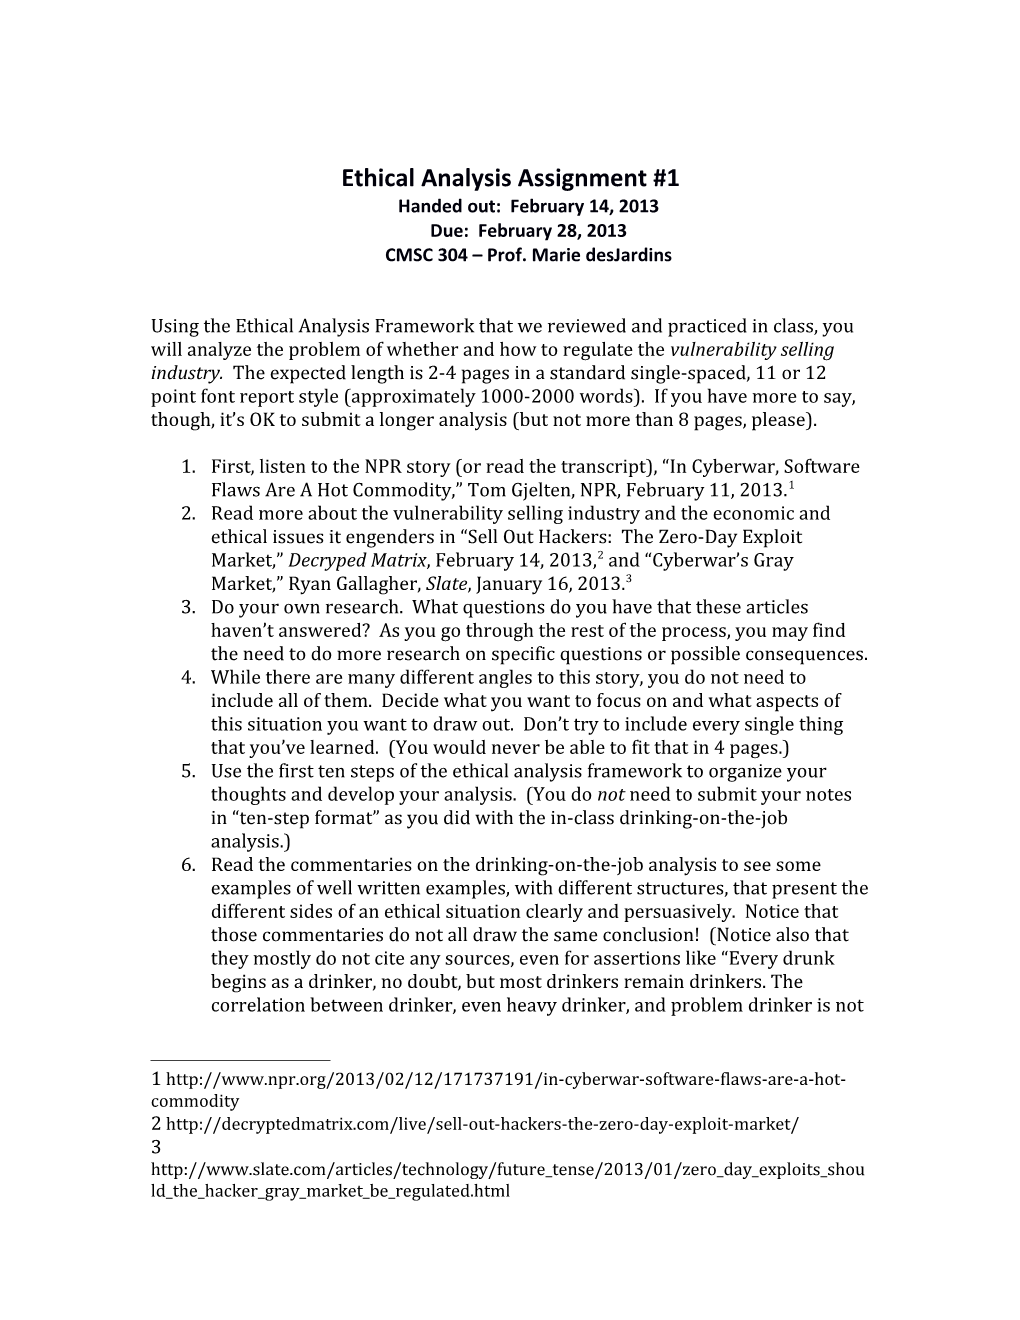 Ethical Analysis Assignment #1Handed Out: February 14, 2013Due: February 28, 2013CMSC 304